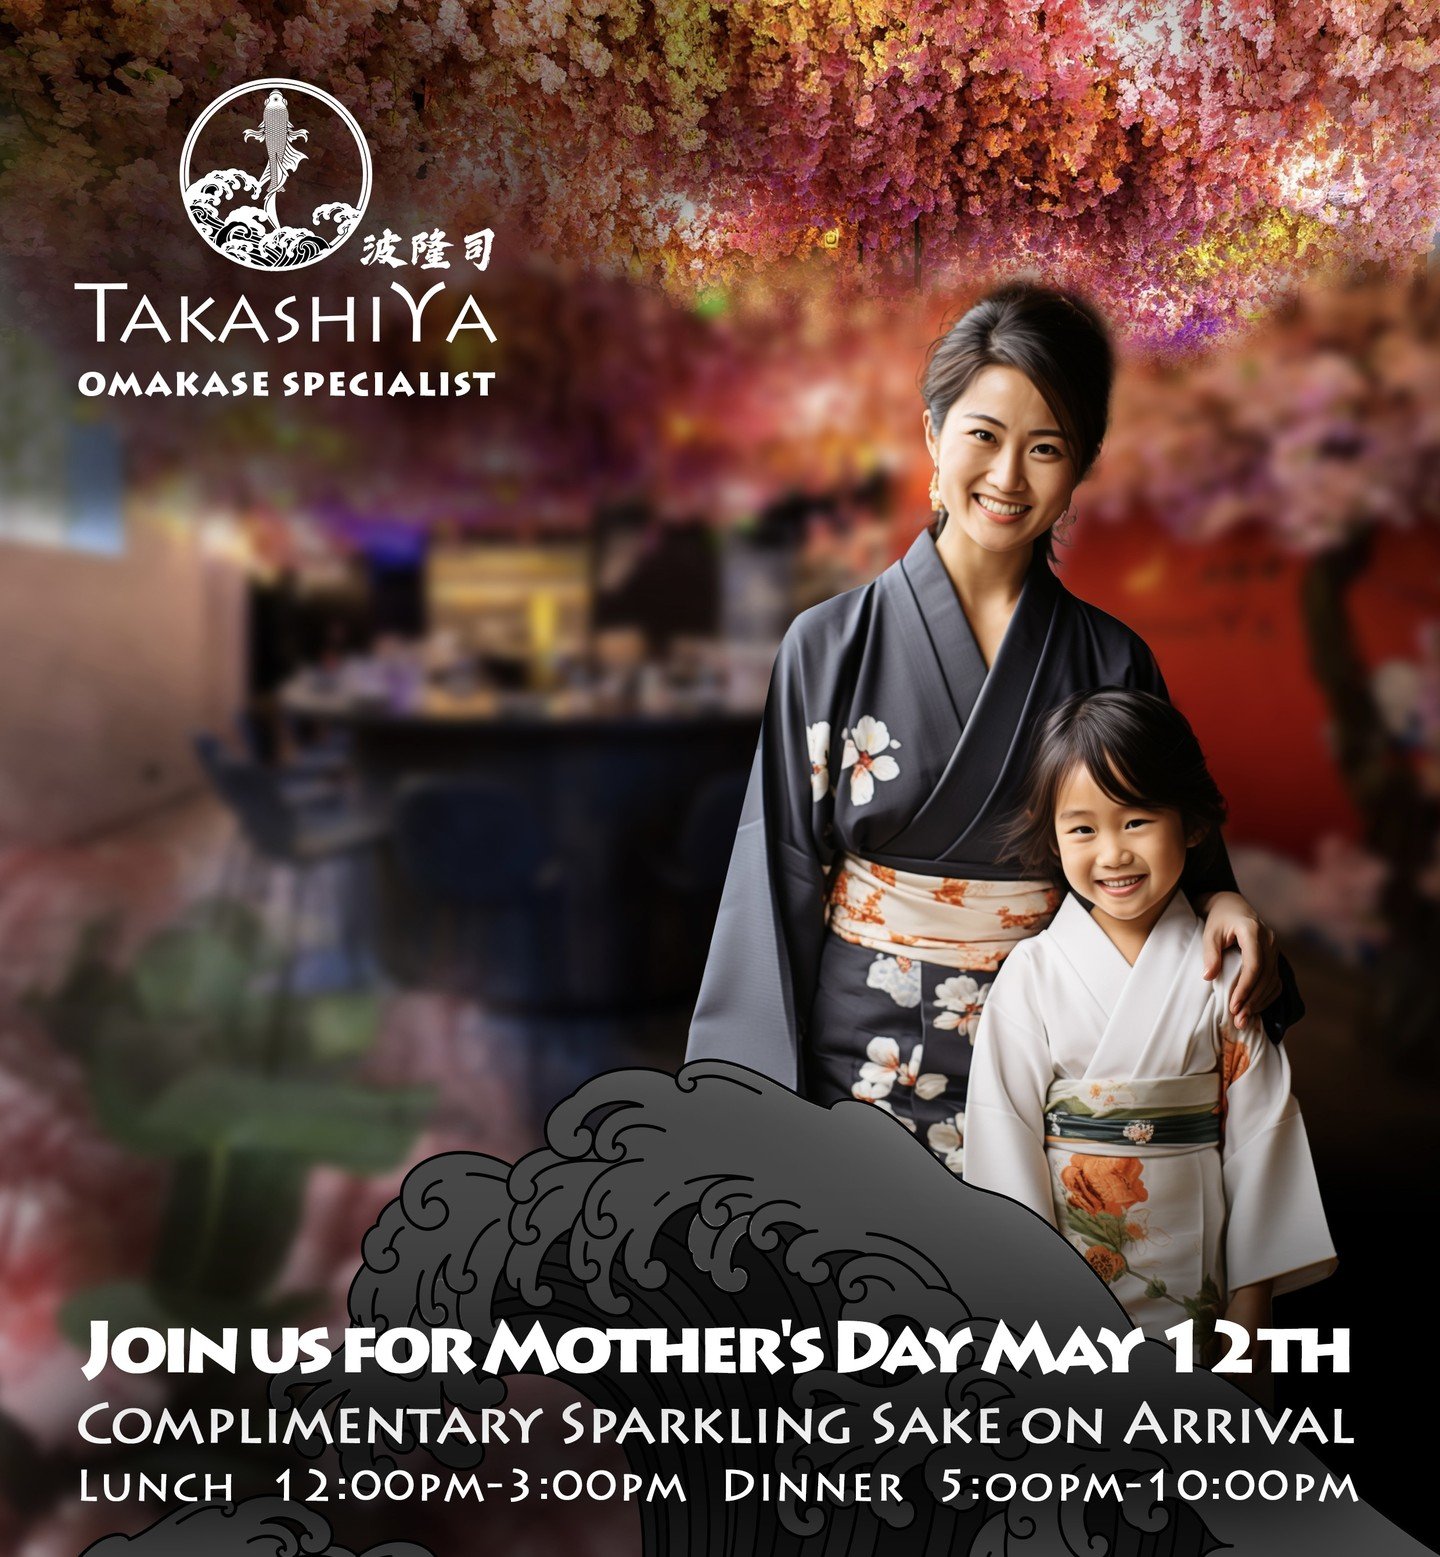 🌸✨ CELEBRATE MOTHER'S DAY WITH US! ✨🌸

Enjoy a complimentary sparkling sake on arrival as we celebrate Mother's Day together! Treat your mom to an immersive journey into the heart of Japanese cuisine and culture. Book your seat now for a special Mo